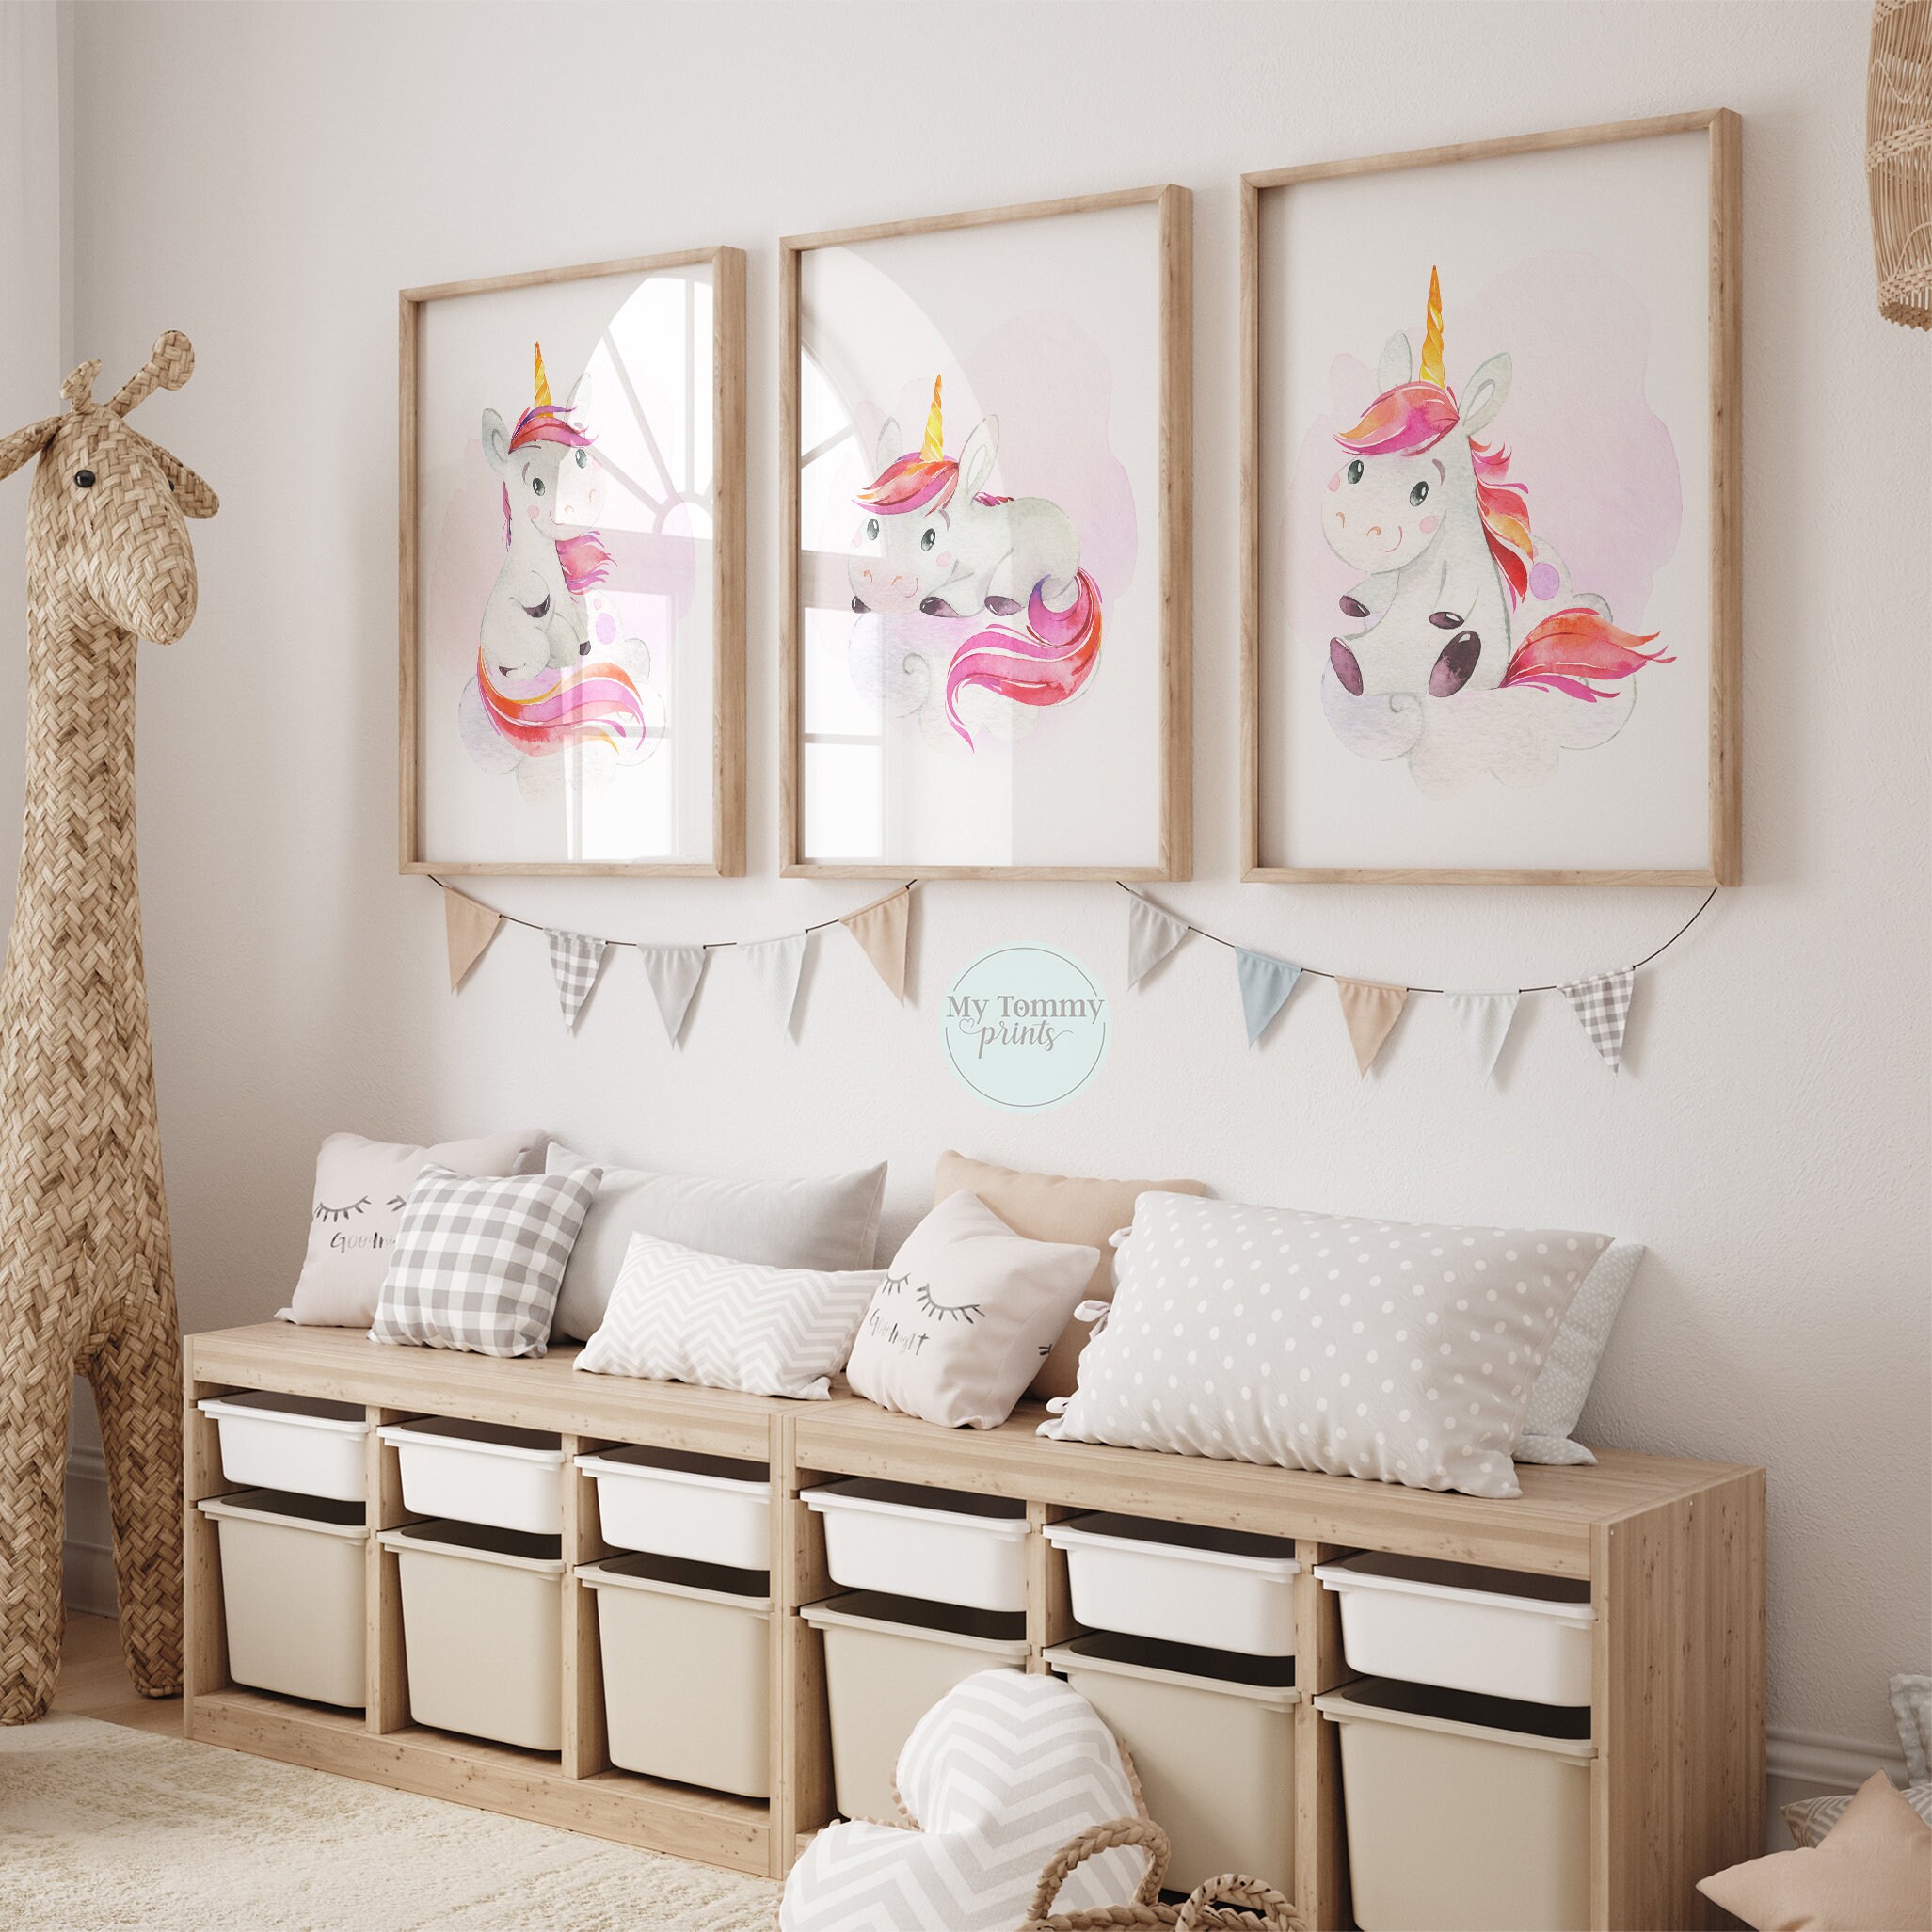 Set of 3 Prints, Personalized Gifts, Art for Kids Hub, Above Bed Decor, Unicorn, Art Print, Love Yourself, Name Sign, Gifts for Kids, Poster, Size: 5